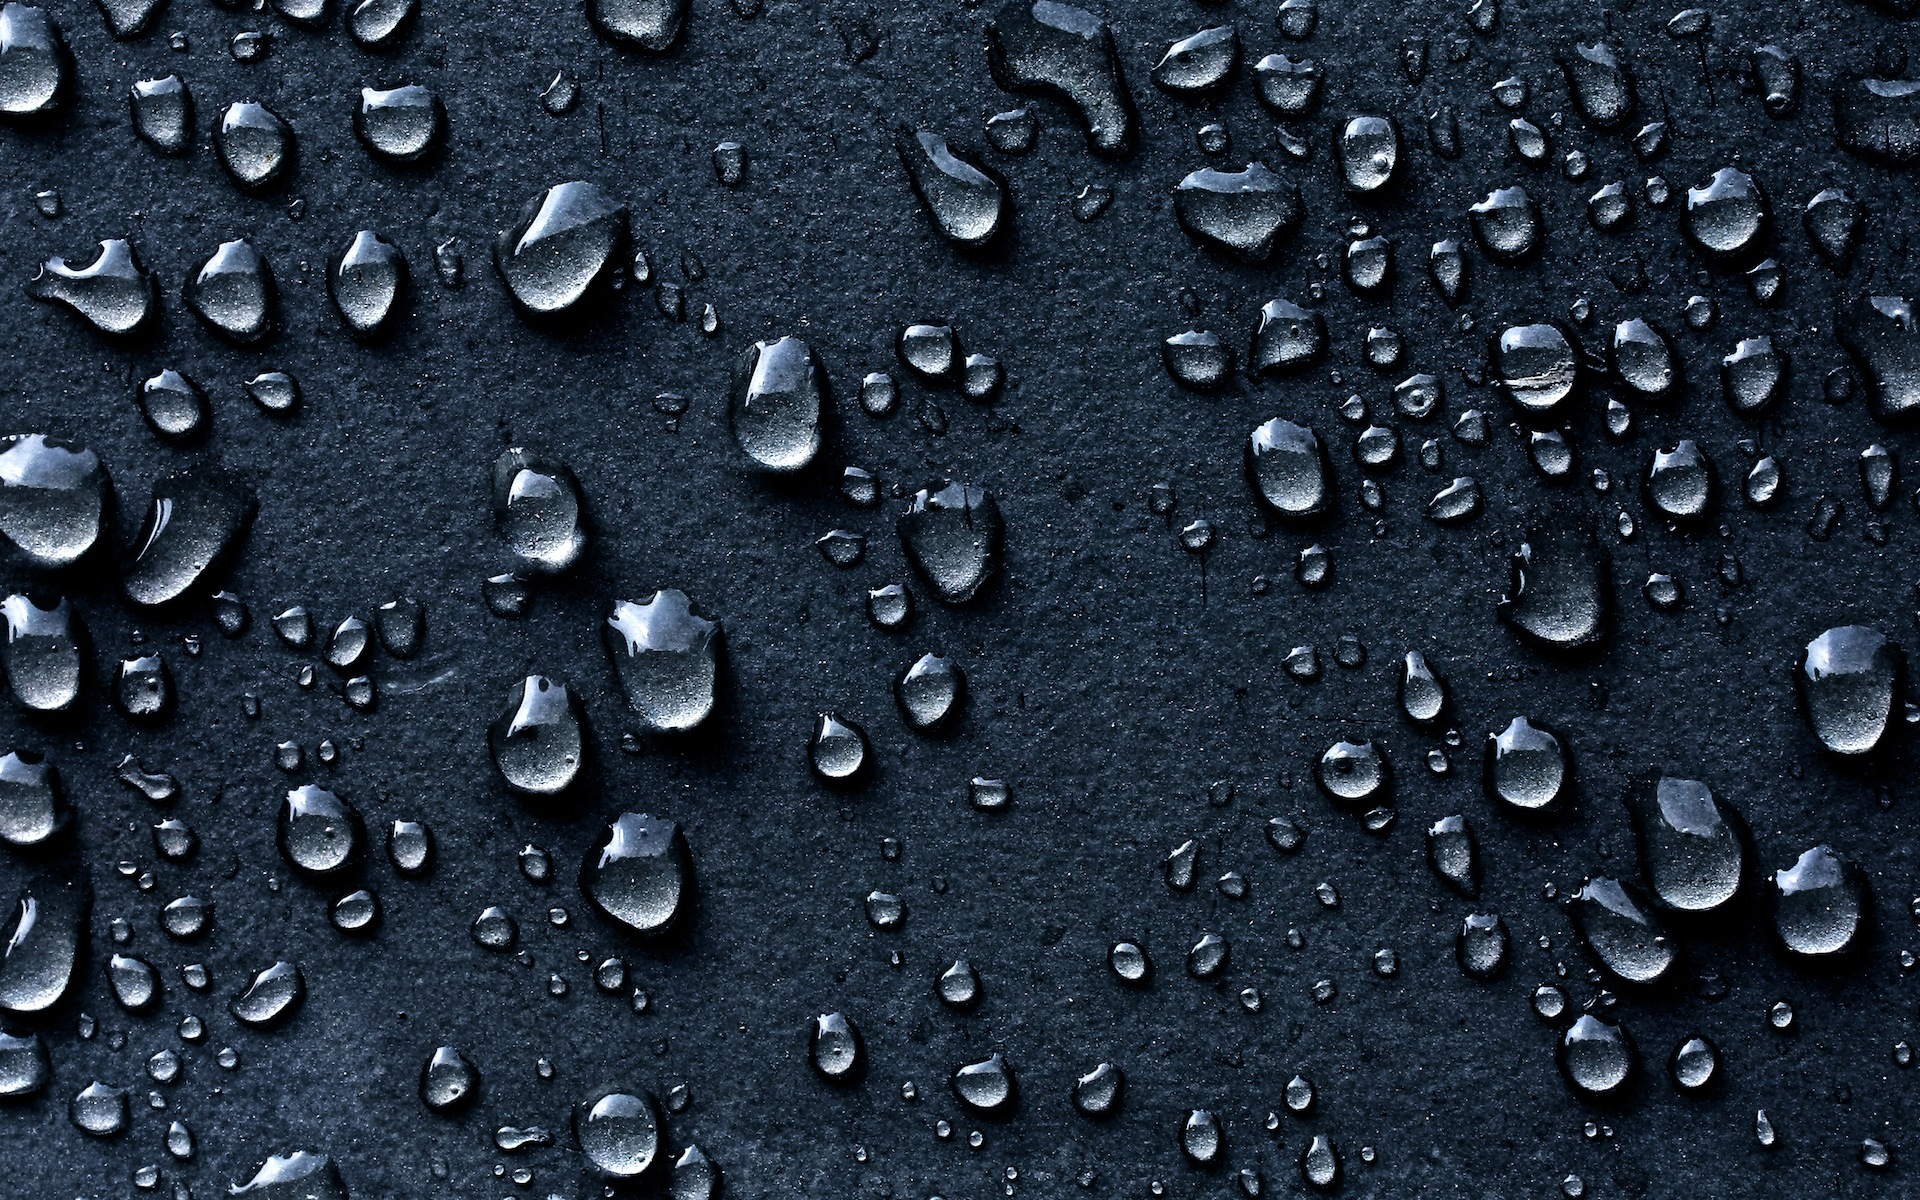  hd wallpaper you are viewing the abstract wallpaper named water drops 1920x1200